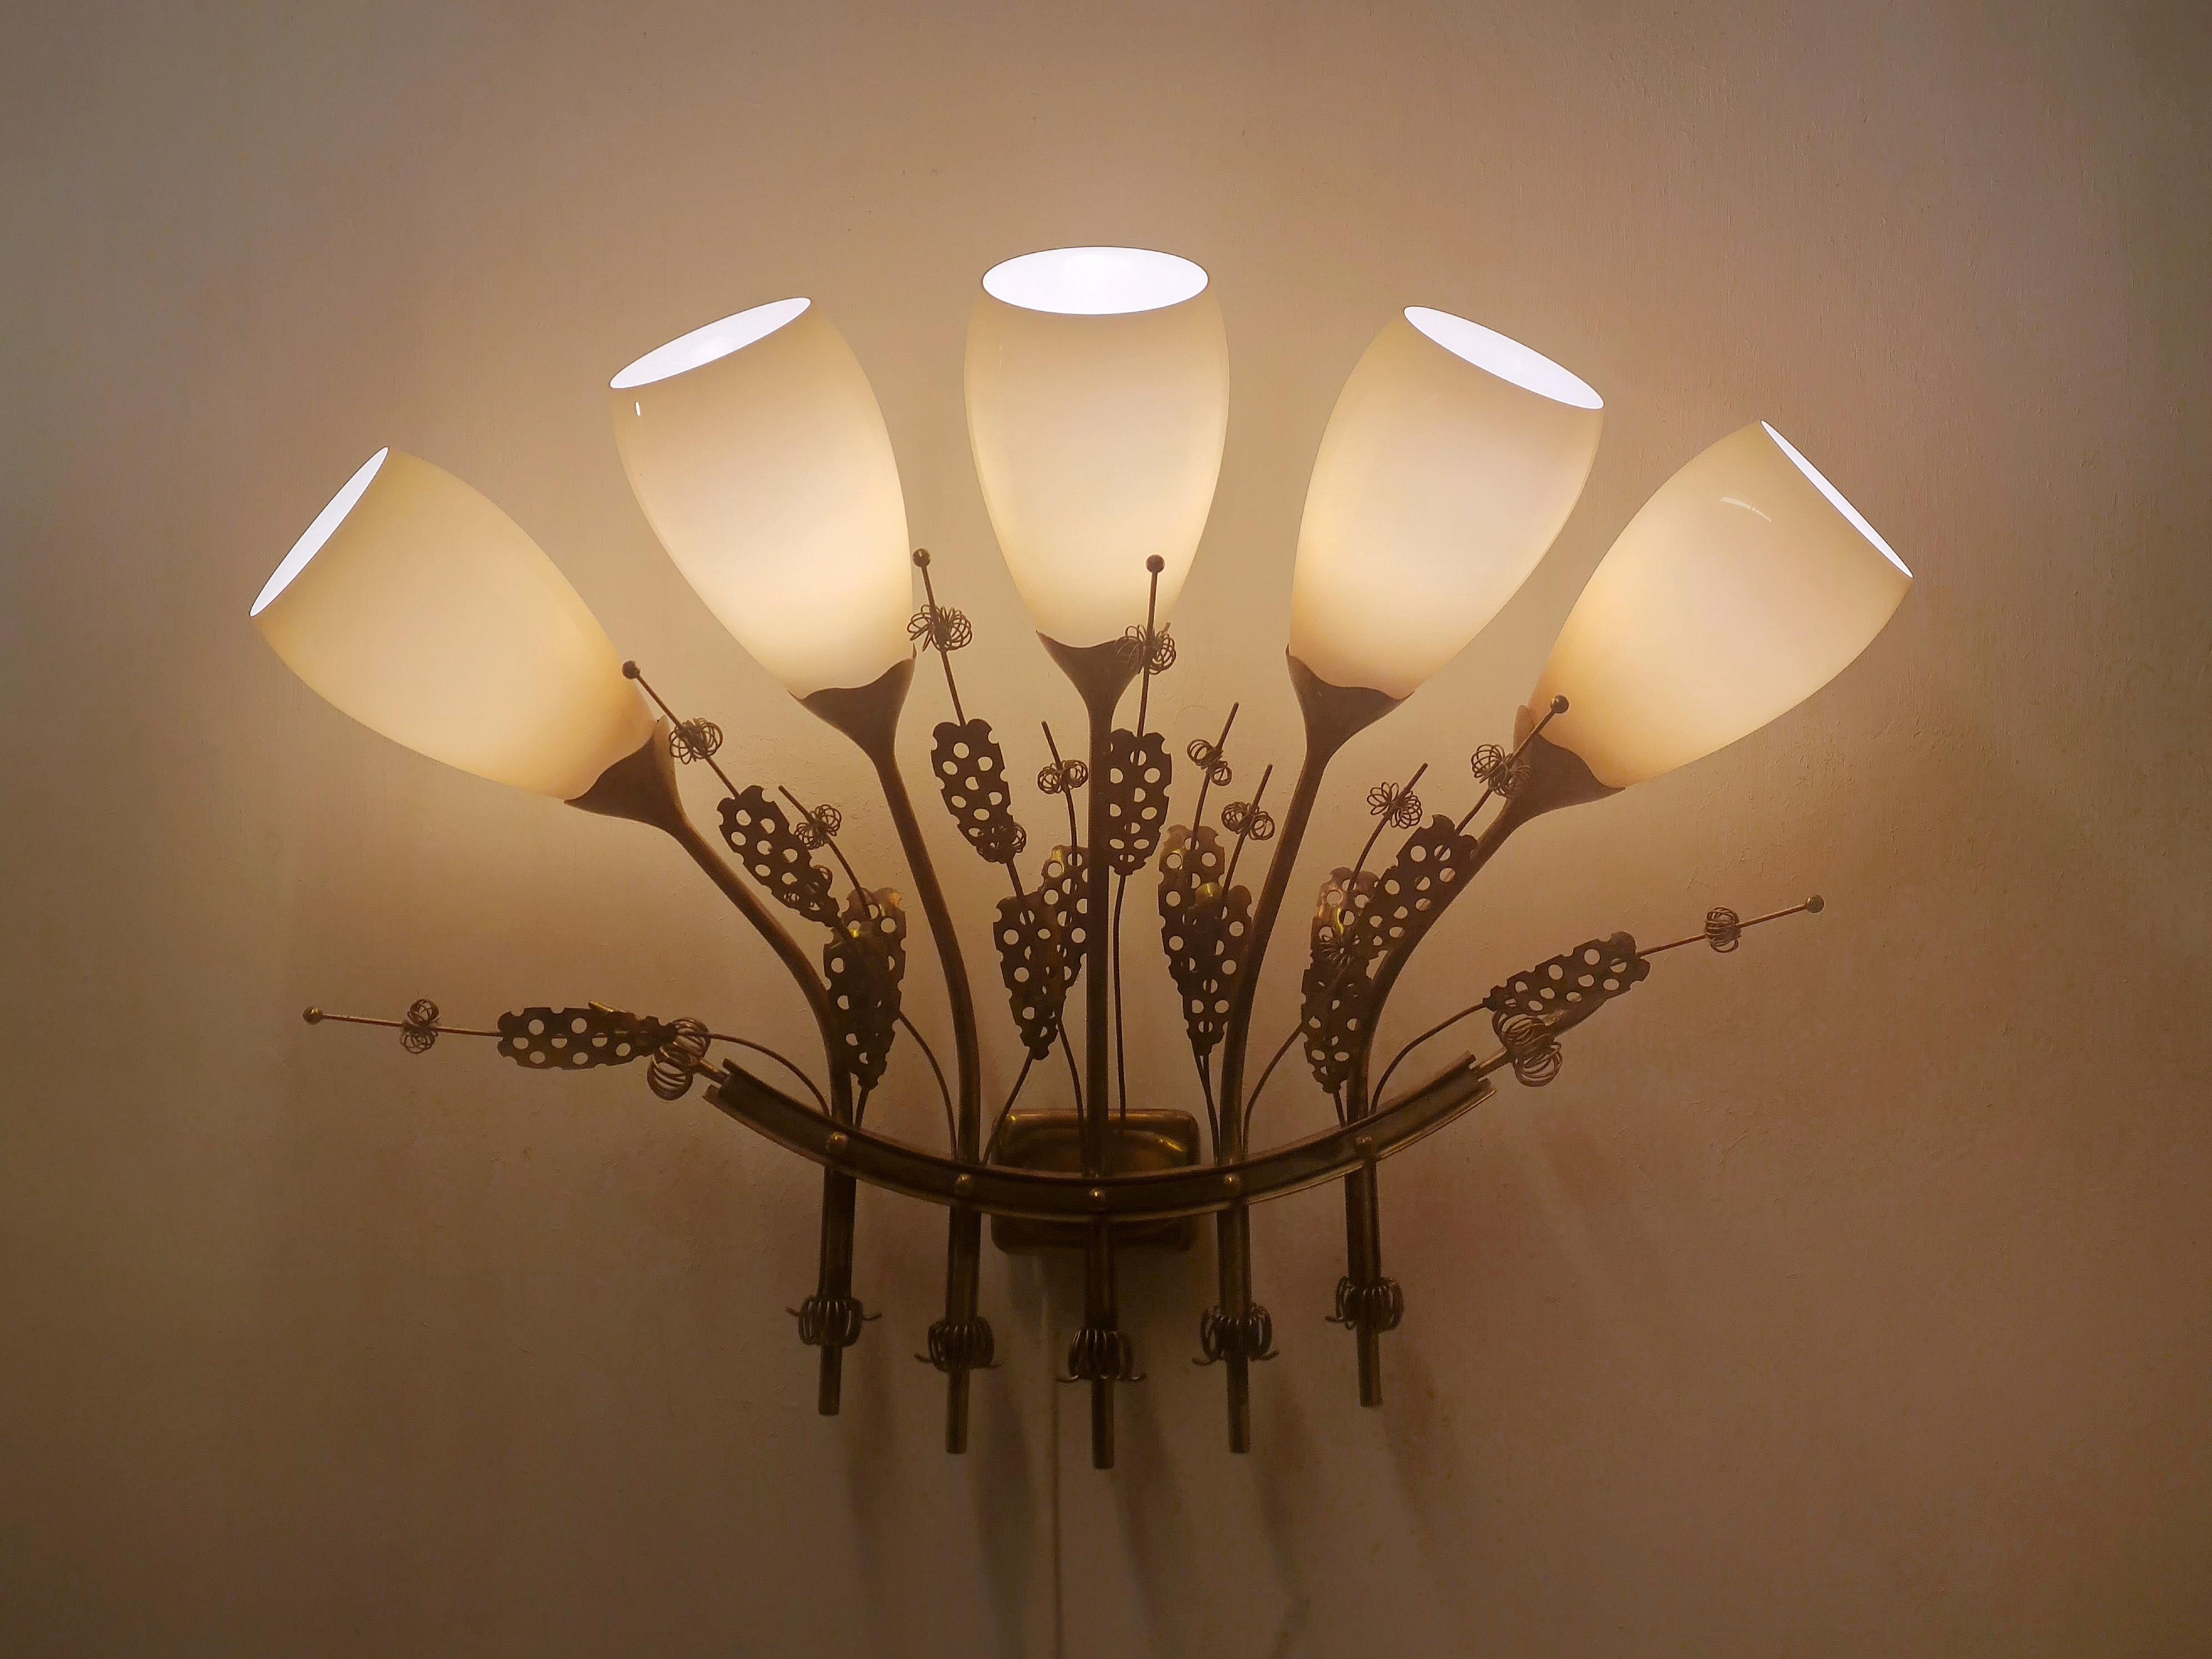 A Pair of Impressive Paavo Tynell Commissioned Wall Lamps, Taito c. 1950s For Sale 2